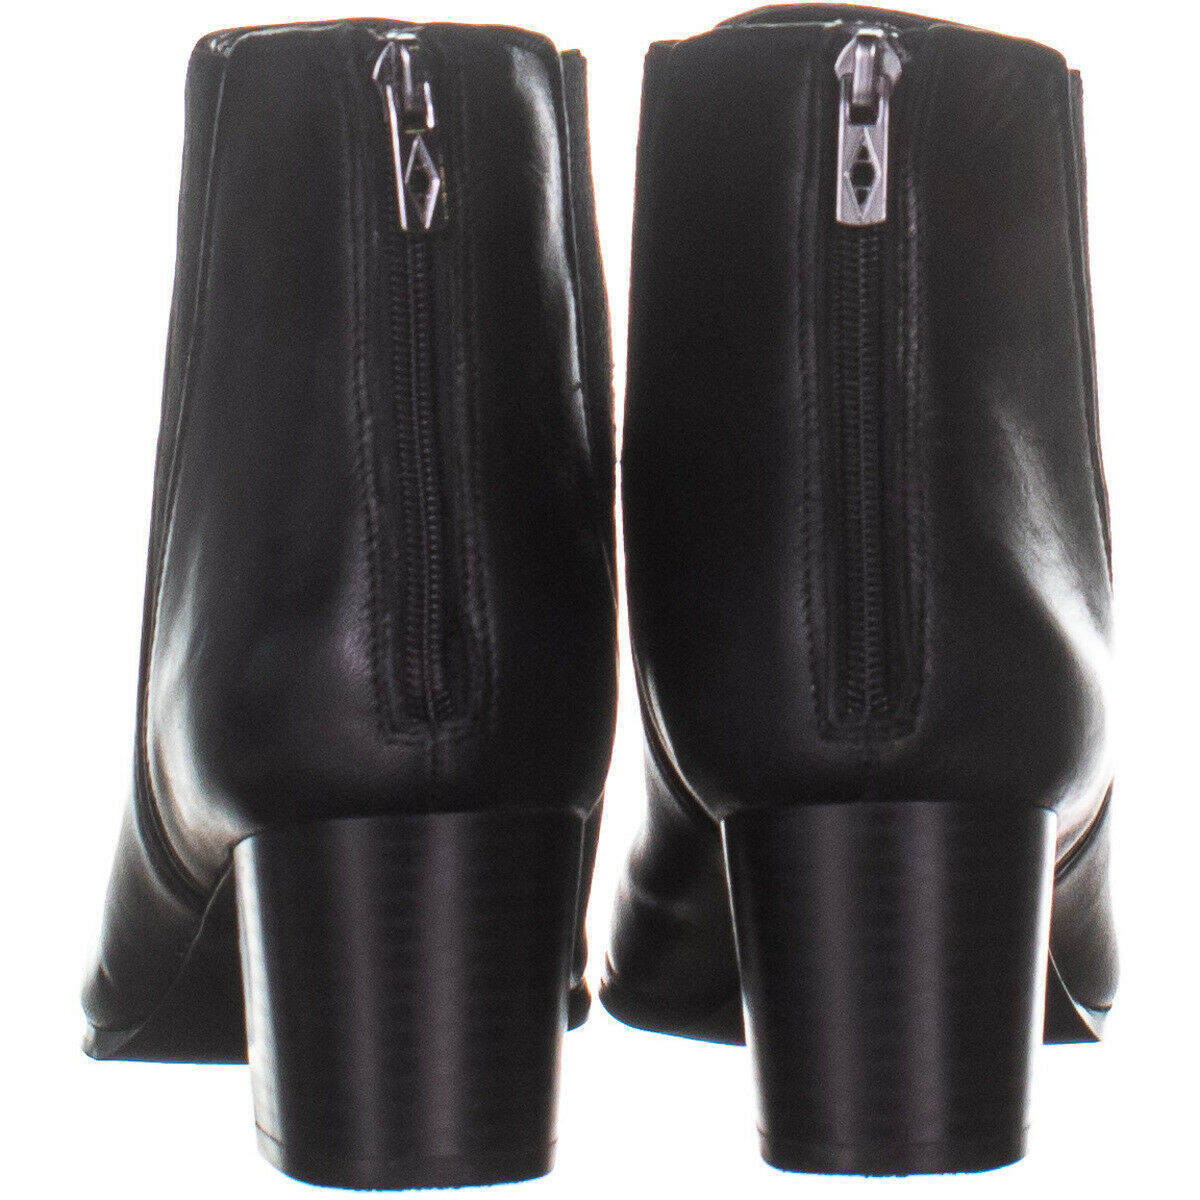 A35 Vitaa Rear Zip Ankle Boots 178, Black Leather, 10 US - Boots